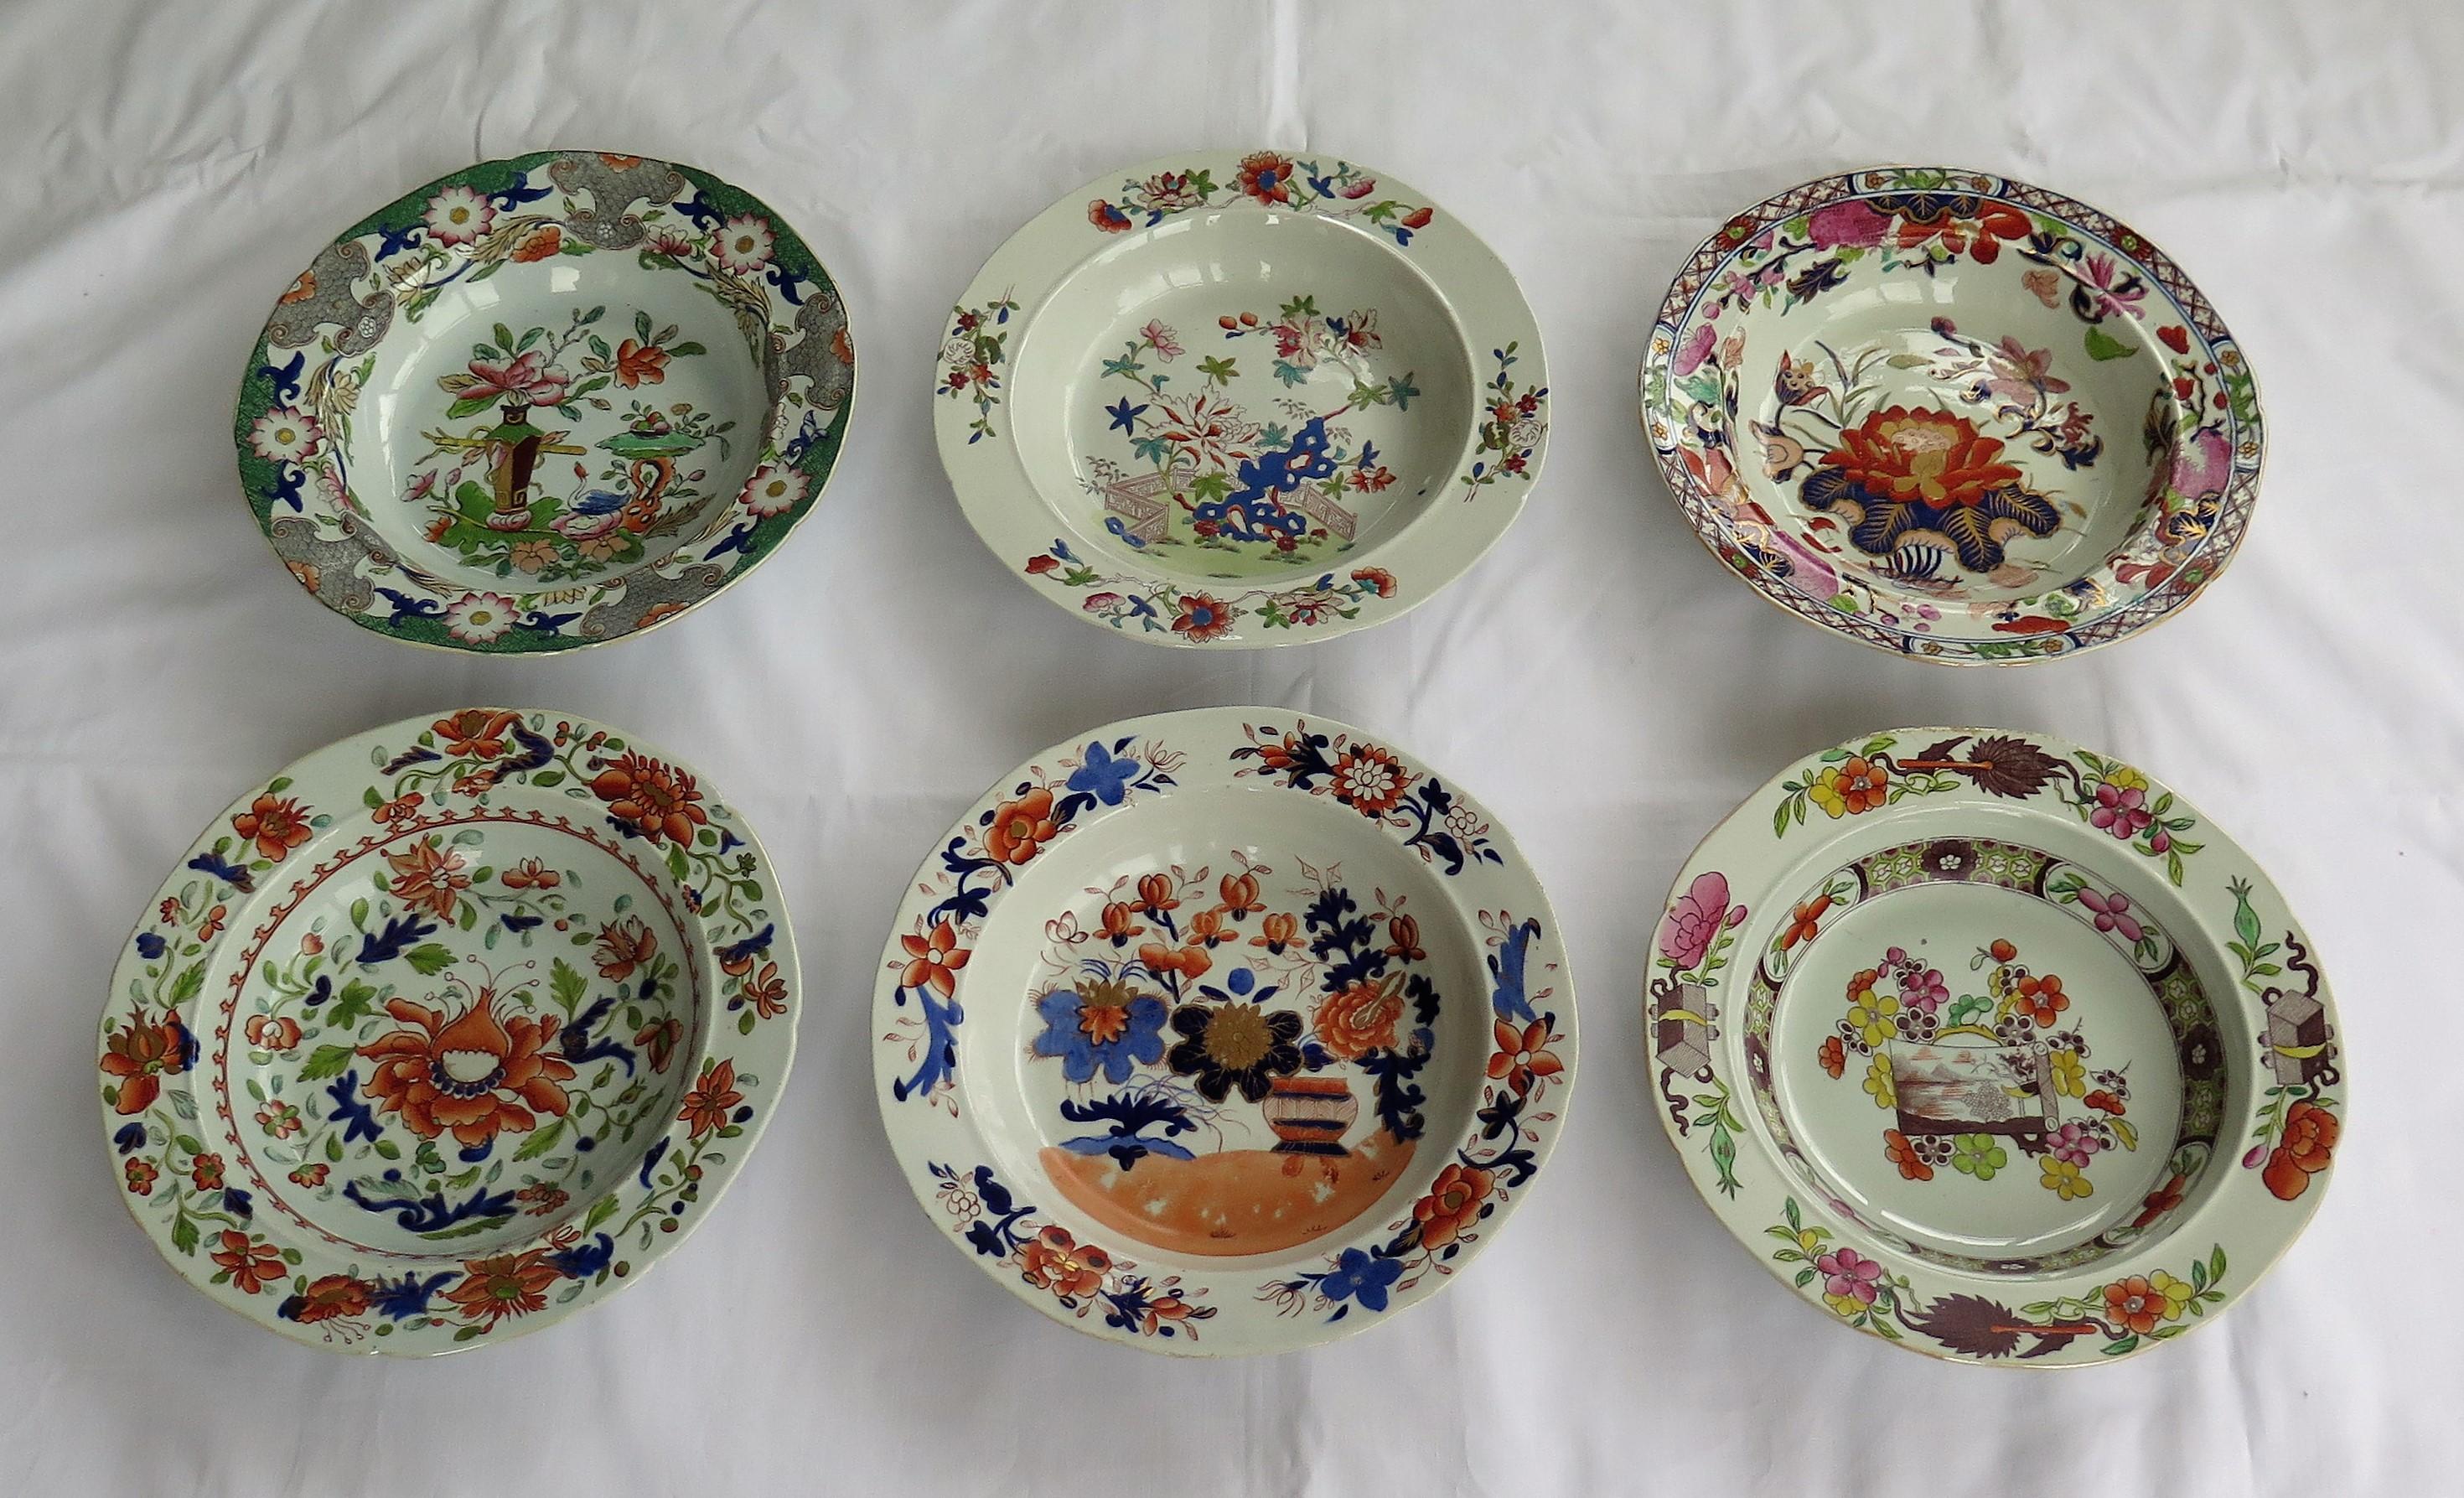 This is a harlequin set of six Mason's Ironstone soup plates or bowls, all dating to the earliest recorded George 3rd period between 1813 and 1820. 

These large soup plates compliment the large Mason's dinner plates we also have listed but the